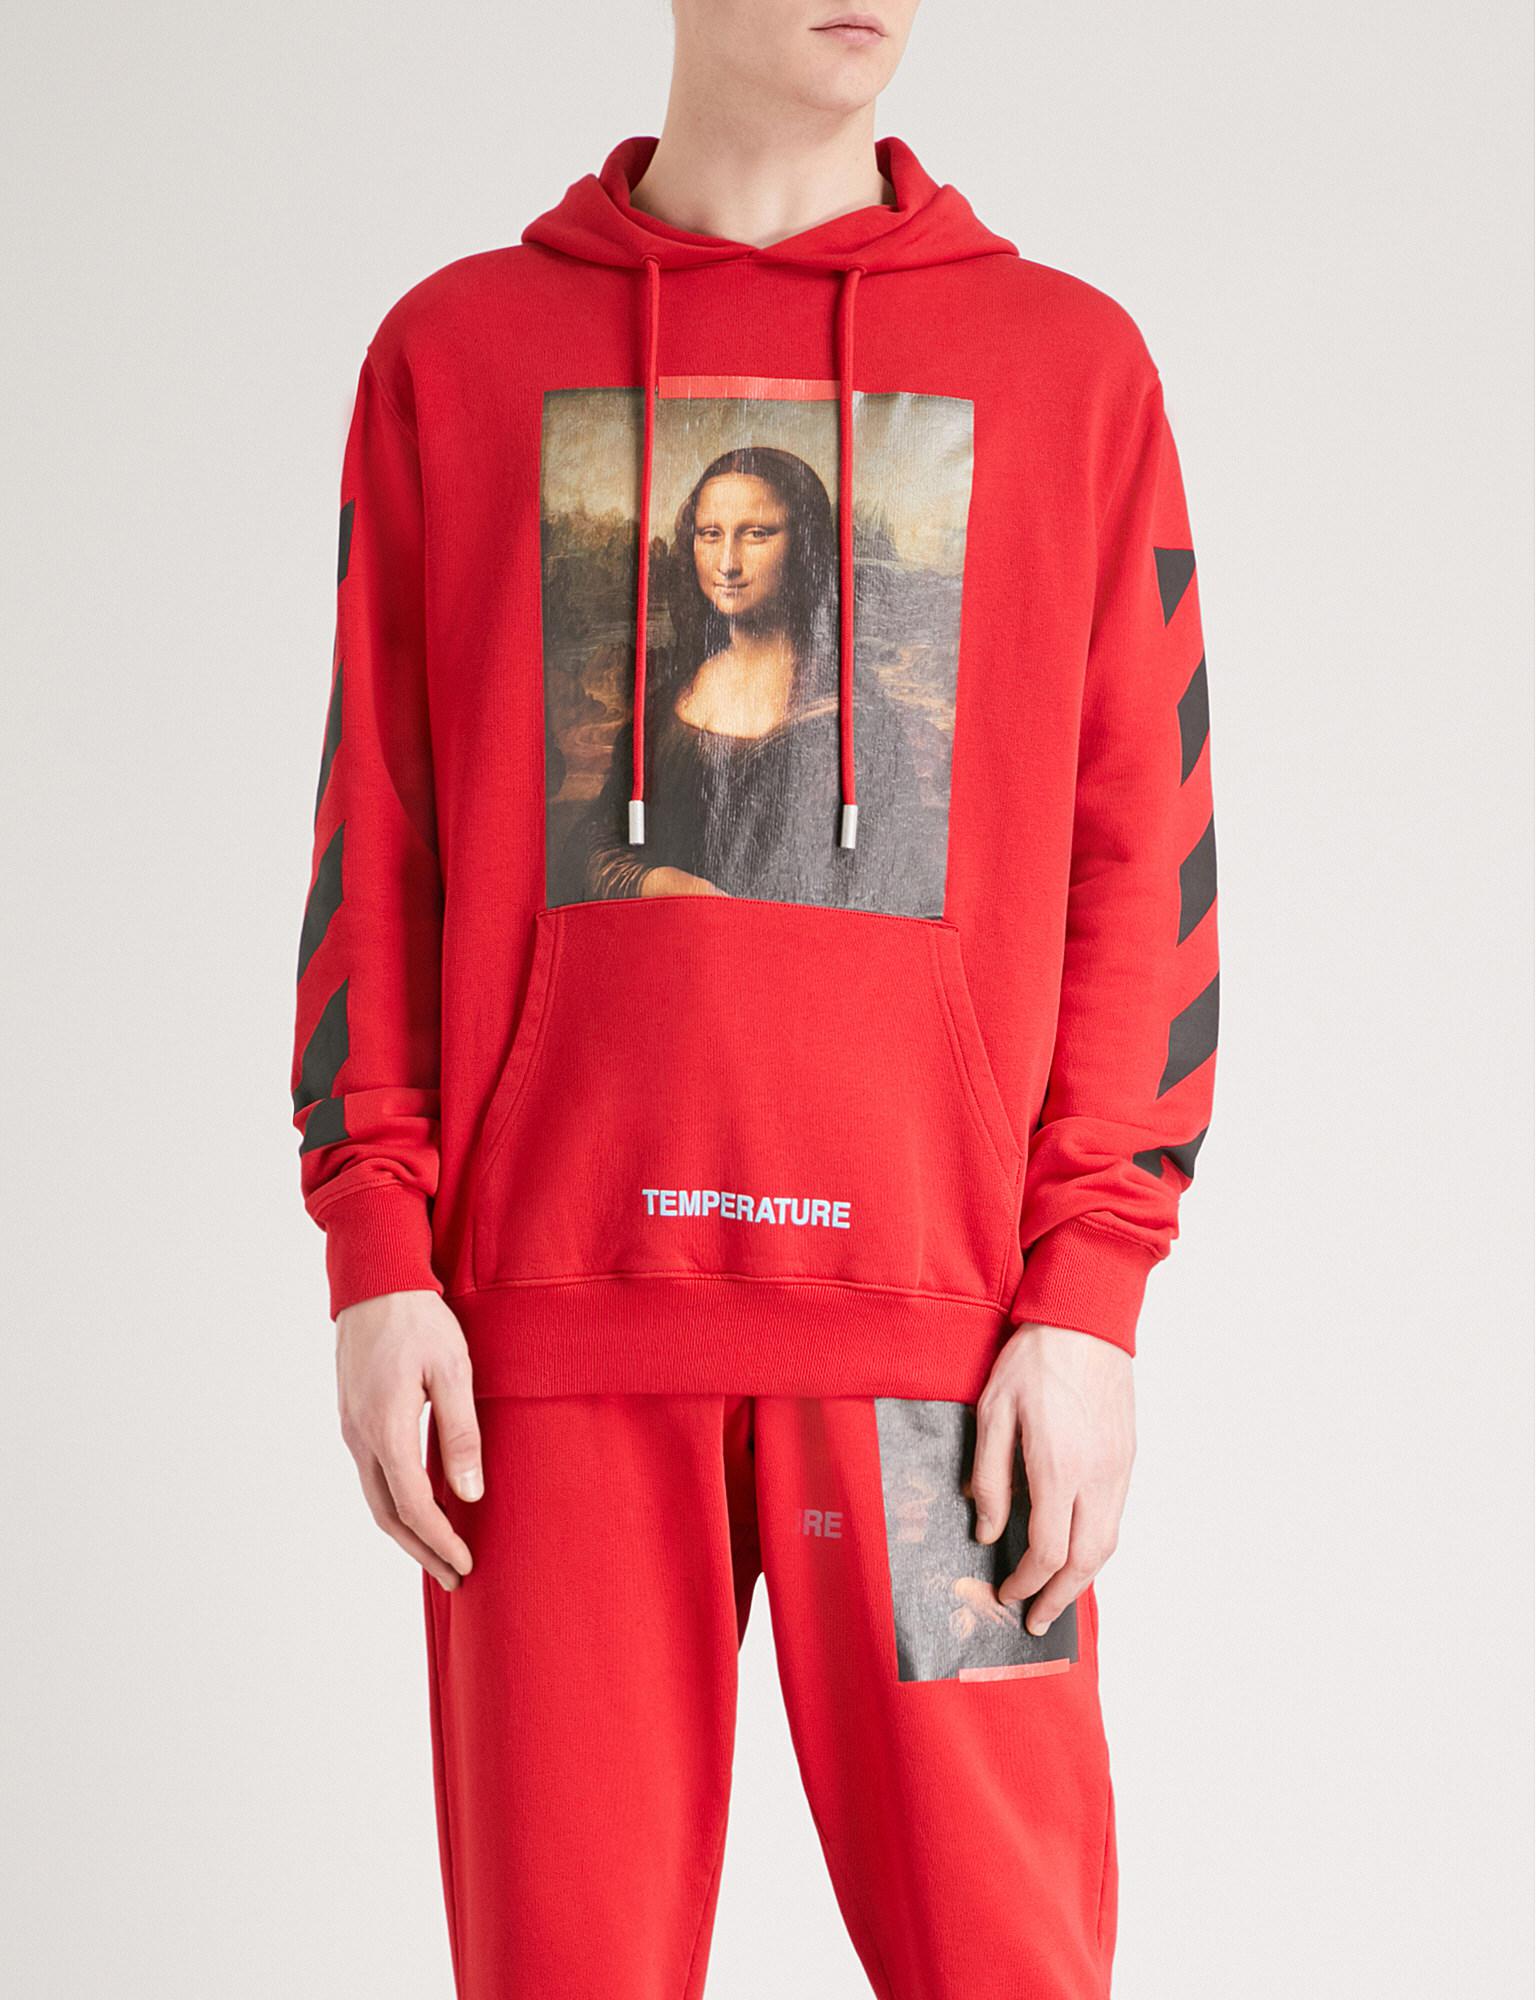 Off-White c/o Virgil Abloh Mona Lisa Cotton-jersey Hoody in Red for Men - Lyst1536 x 2000